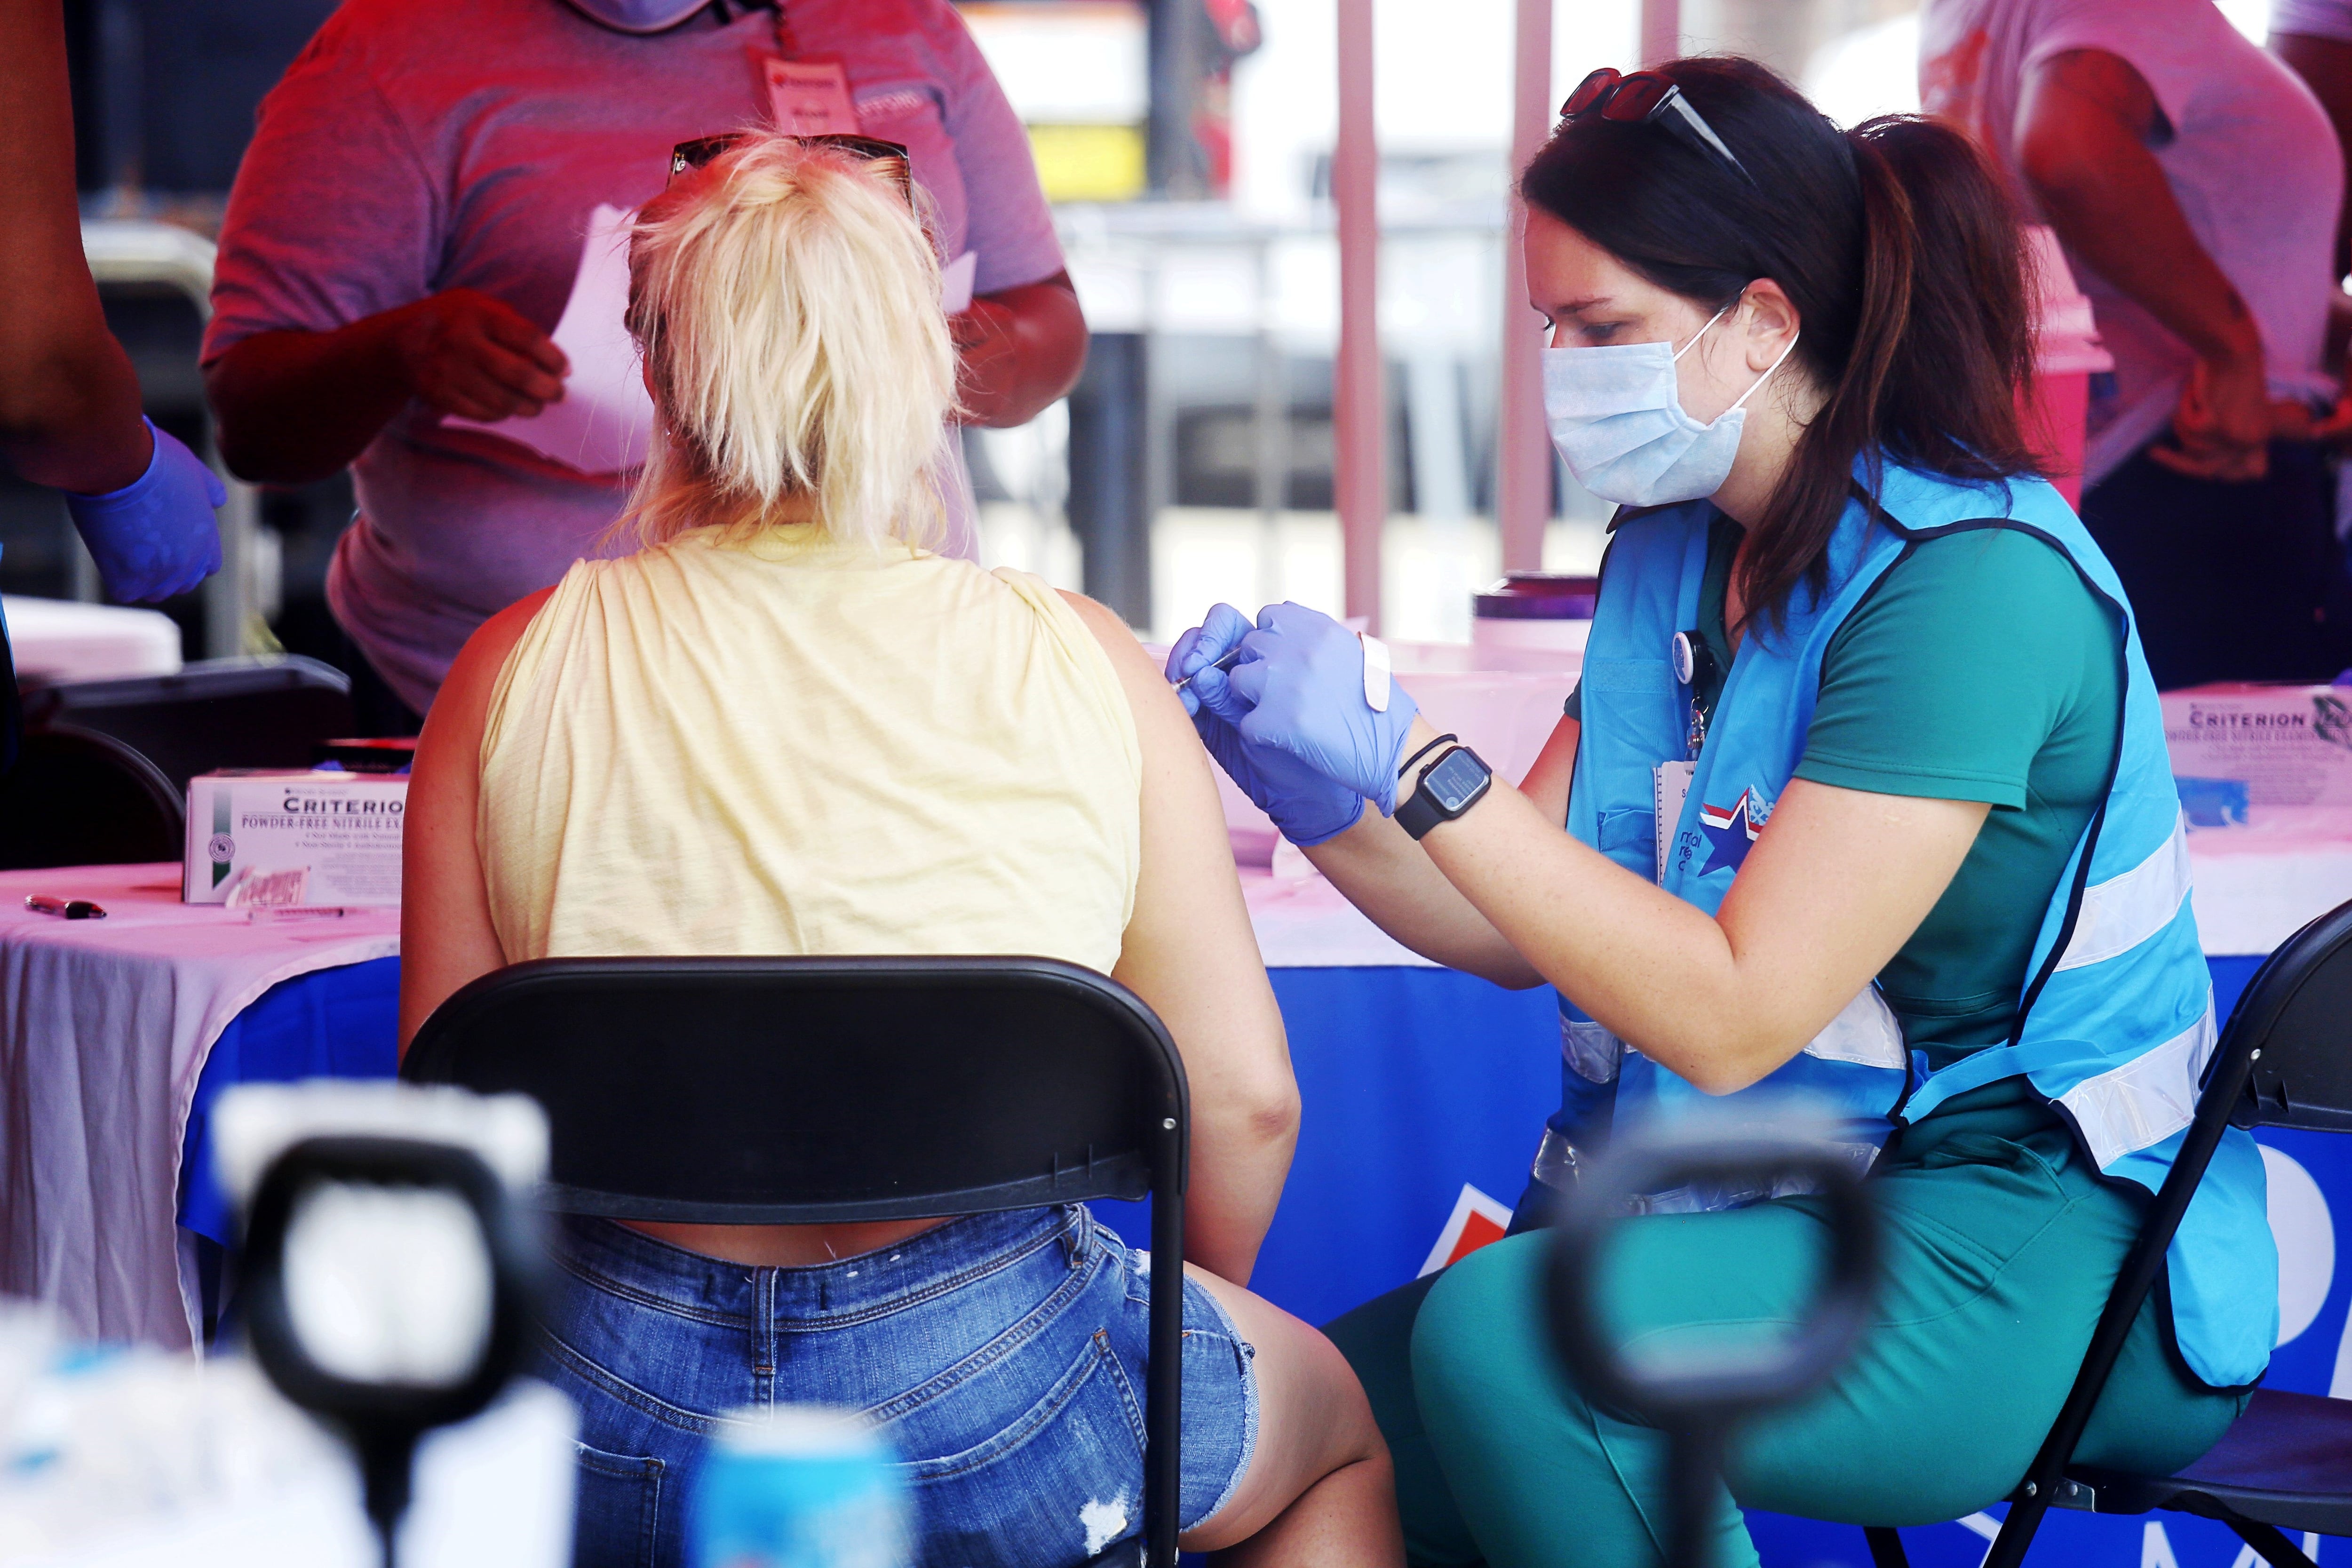 A woman wearing a yellow shirt seated on a black metal folding chair receives a shot in the arm from a nurse wearing a face mask and gloves.